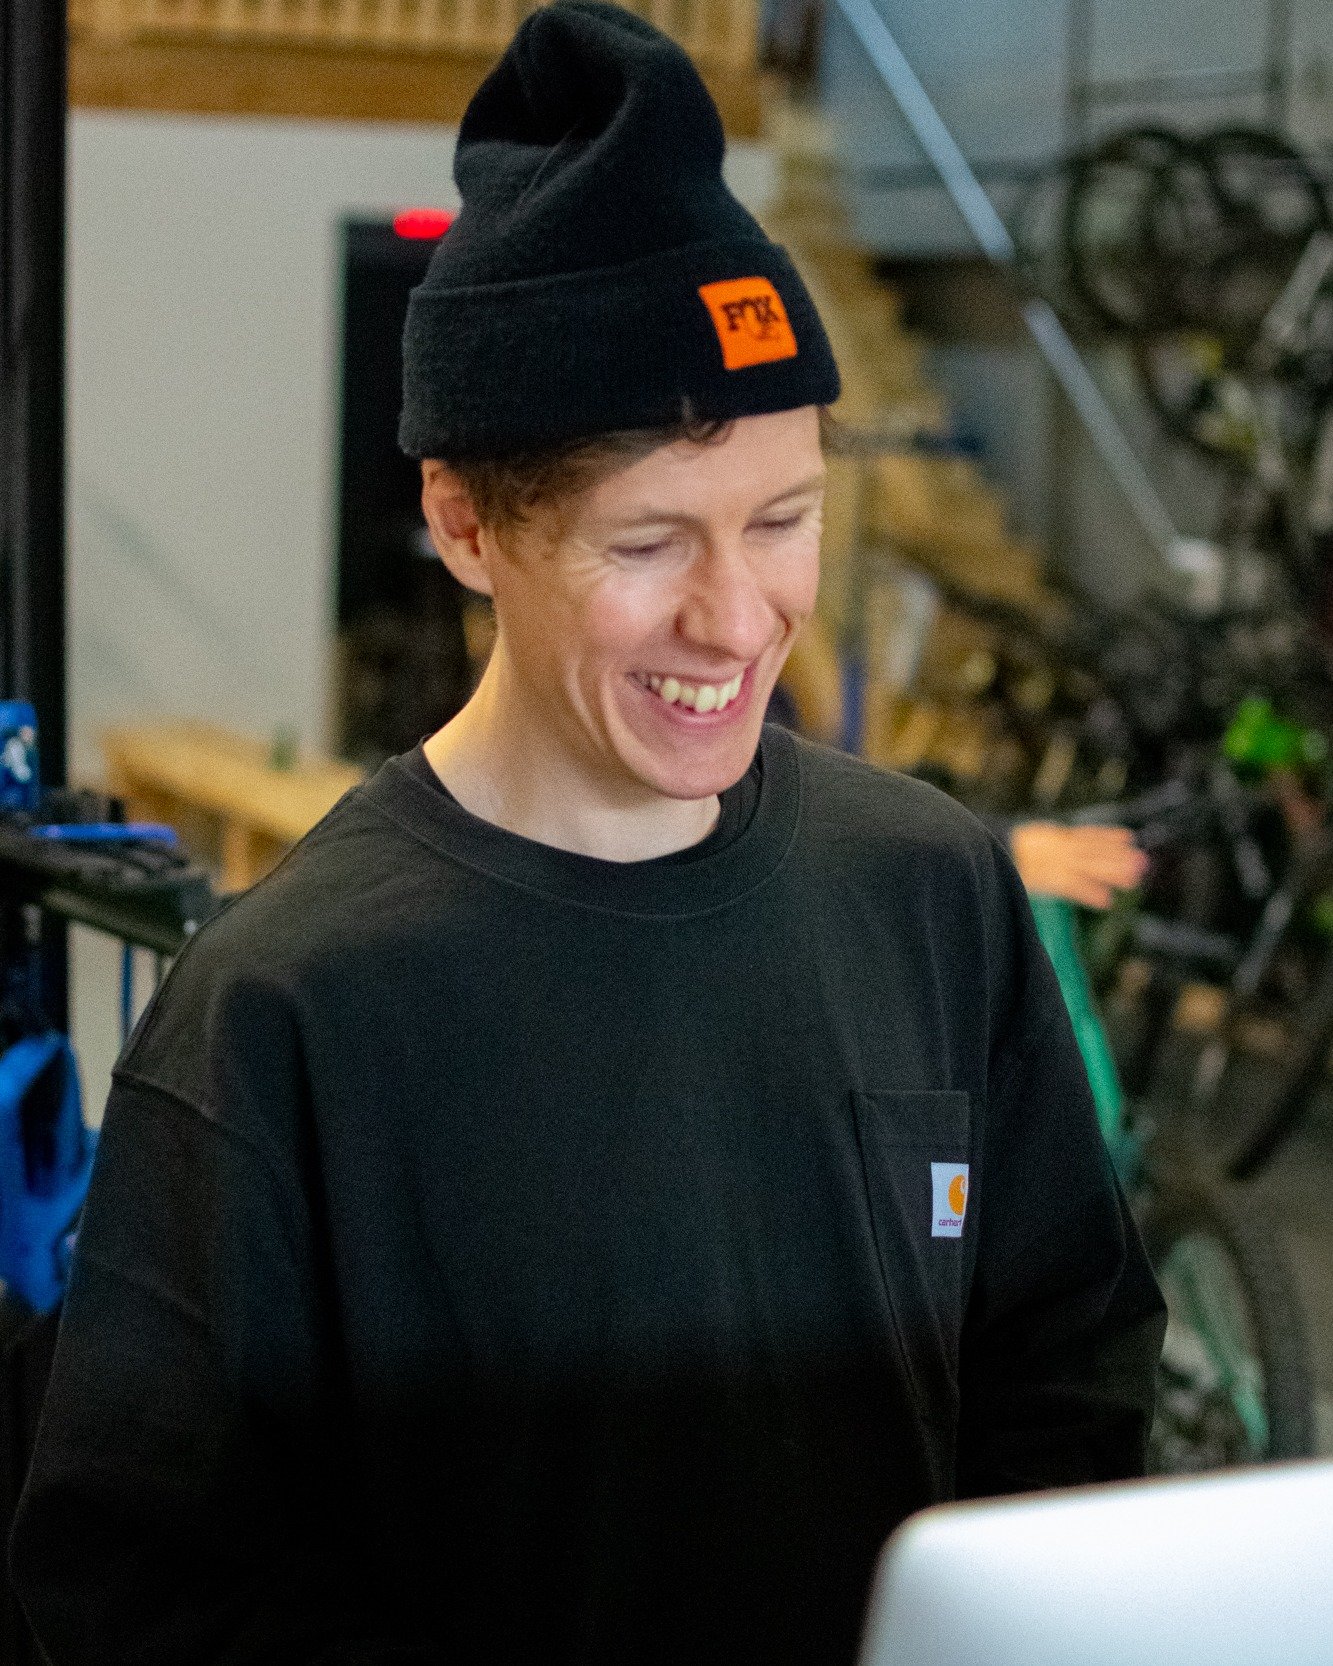 Adam is back in the office after a long weekend of riding on the Sunshine Coast. Hey, could be worse!
.
.
.
#BikeMechanic #MTB #BikeLife #BikeShop #Cycling